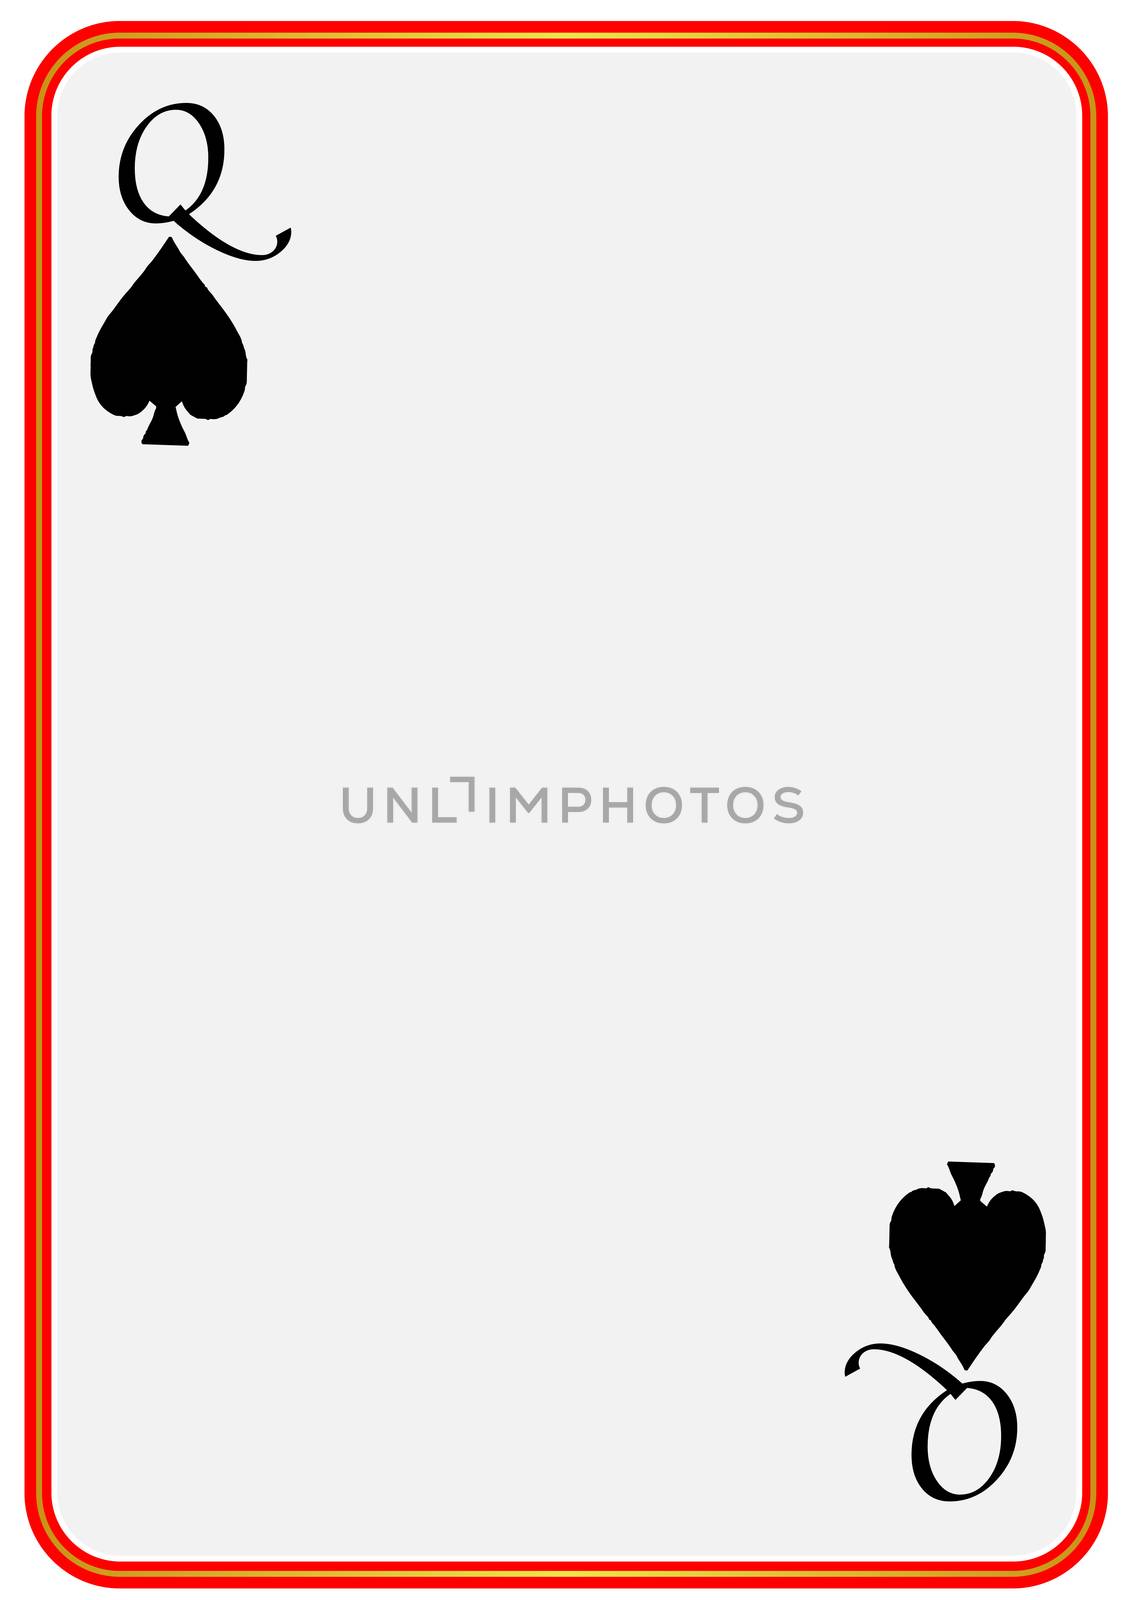 A blank Queen of Spades playing card over a white background